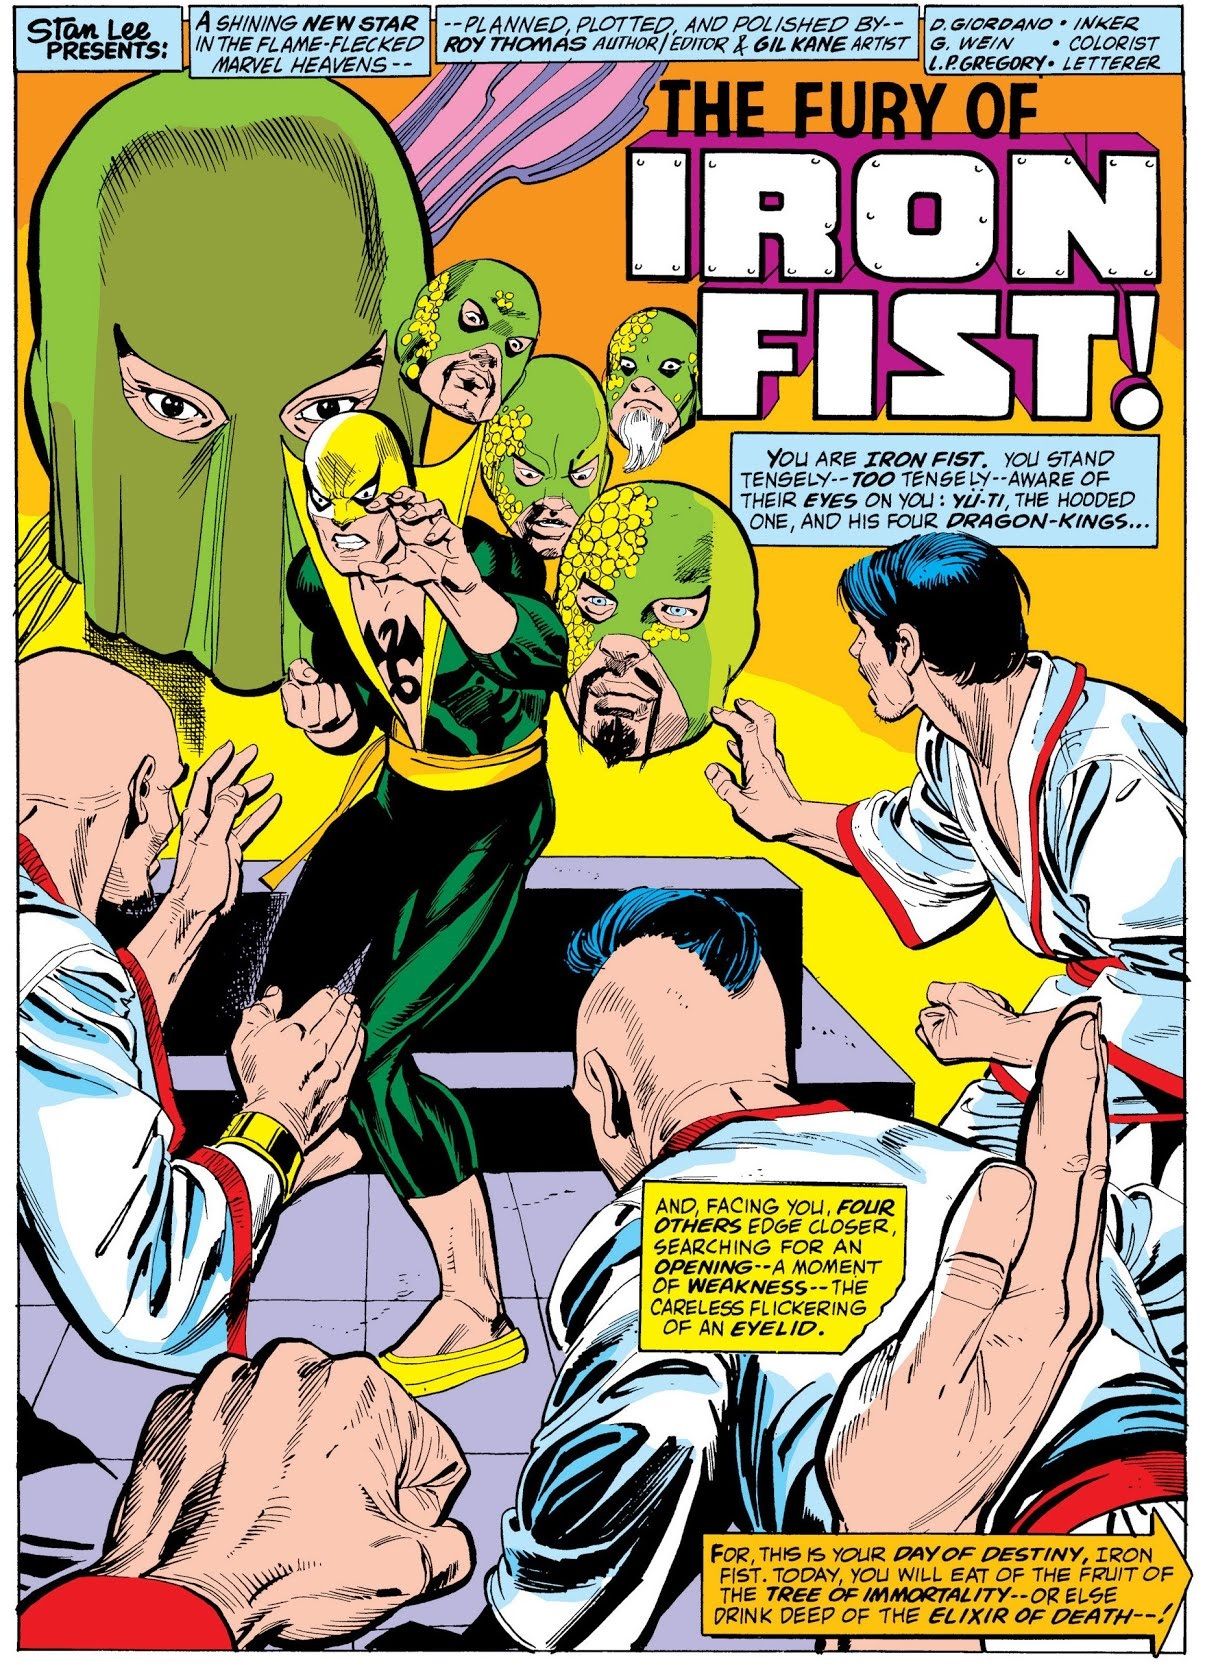 Iron Fist debuted